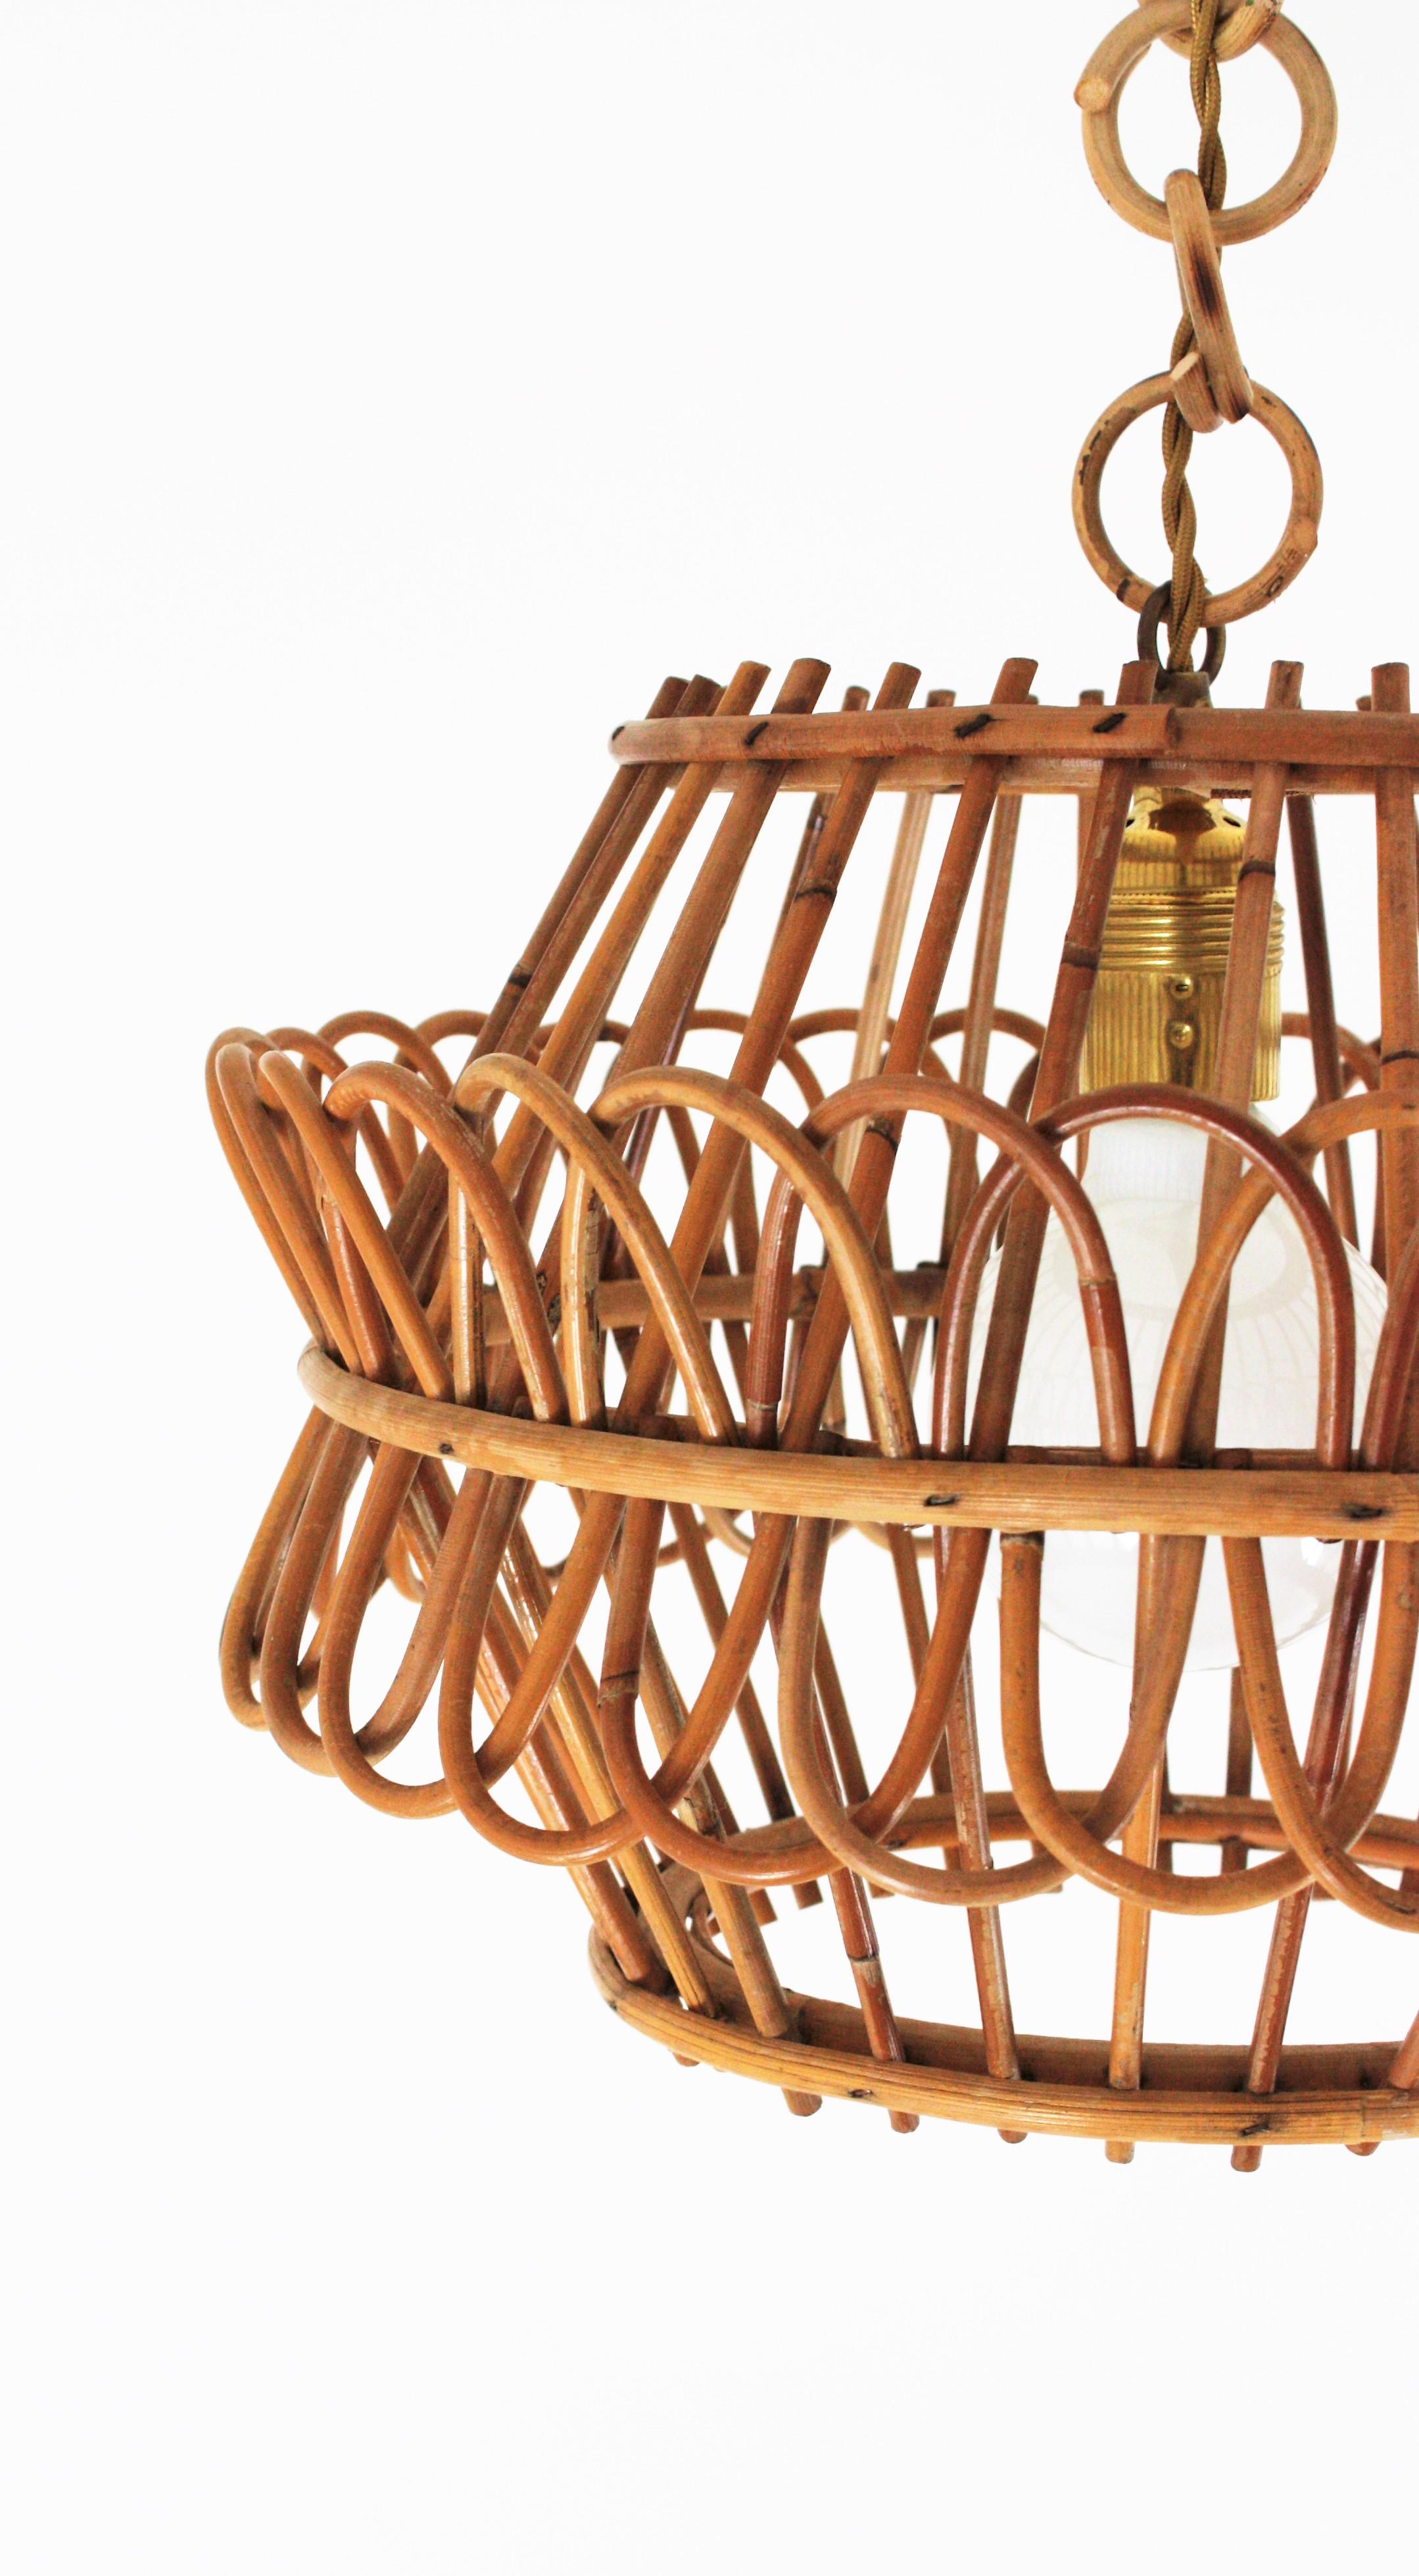 French Pendant Light or Lantern in Rattan, 1950s For Sale 7